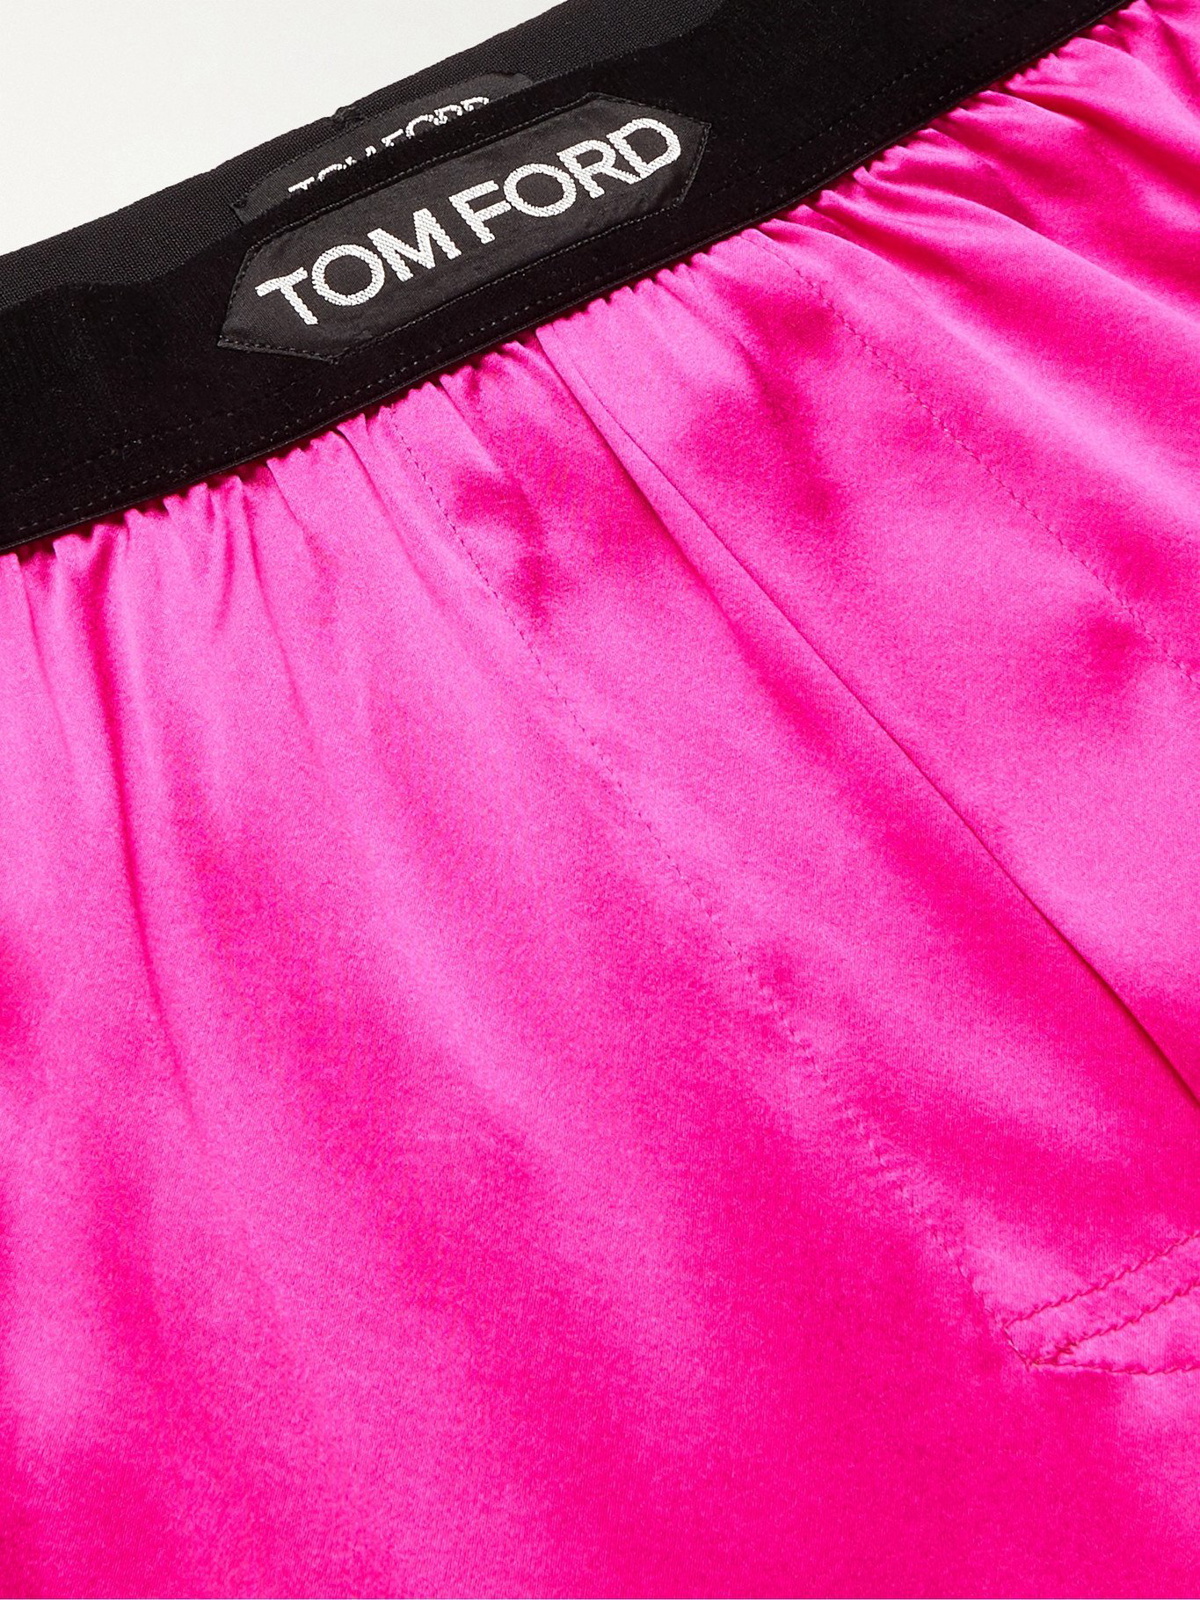 Satin shorts in pink - Tom Ford